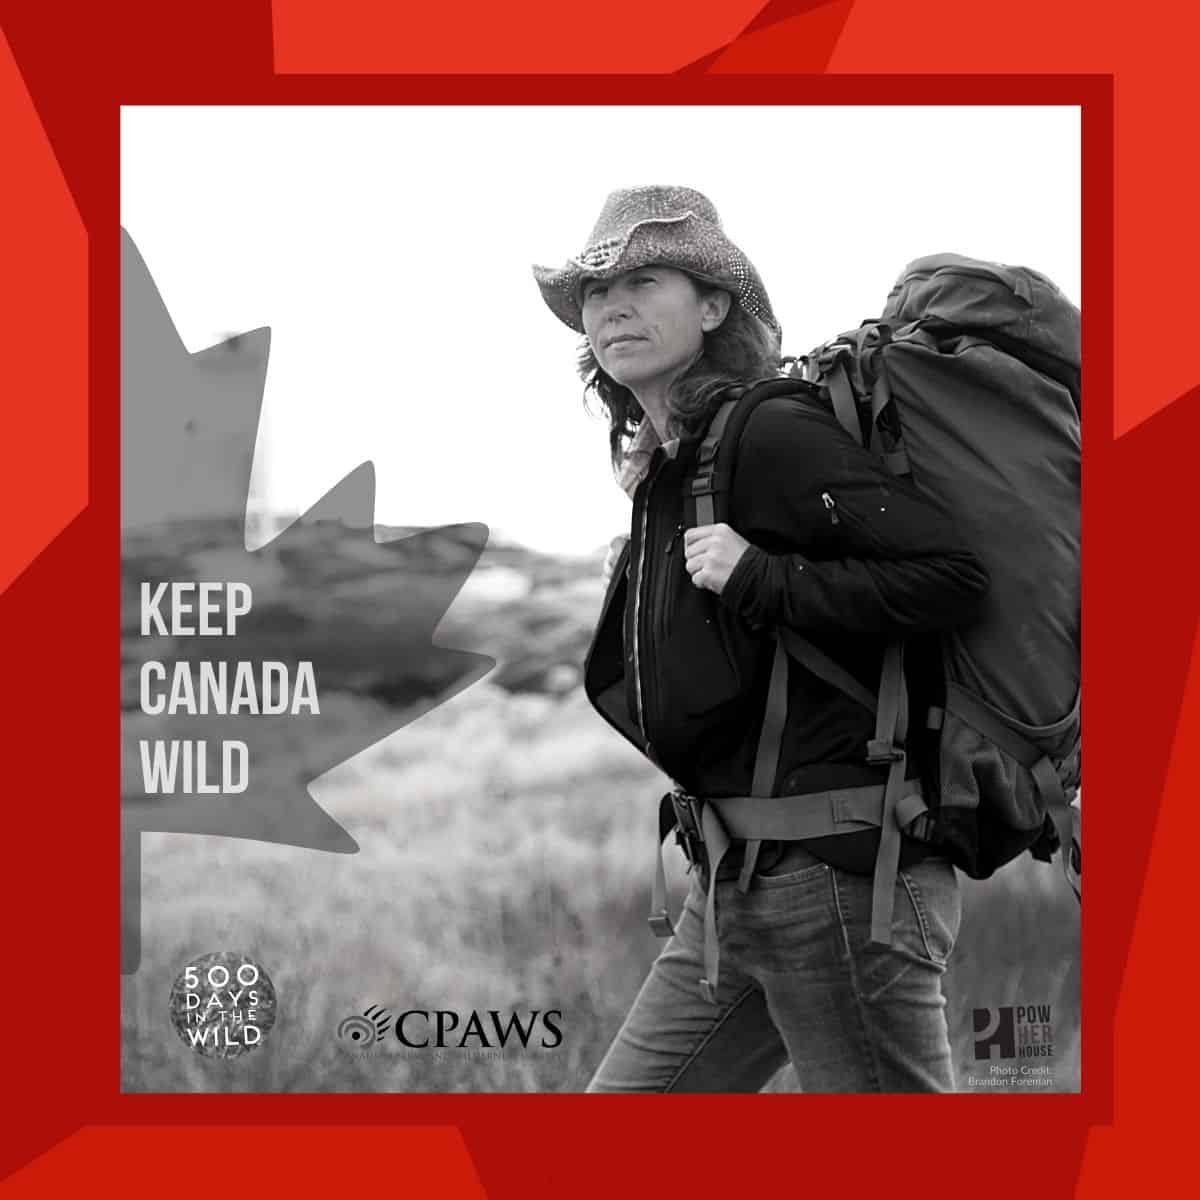 CANADIAN FILMMAKER PARTNERS WITH CPAWS TO KEEP CANADA WILD - PowHERhouse